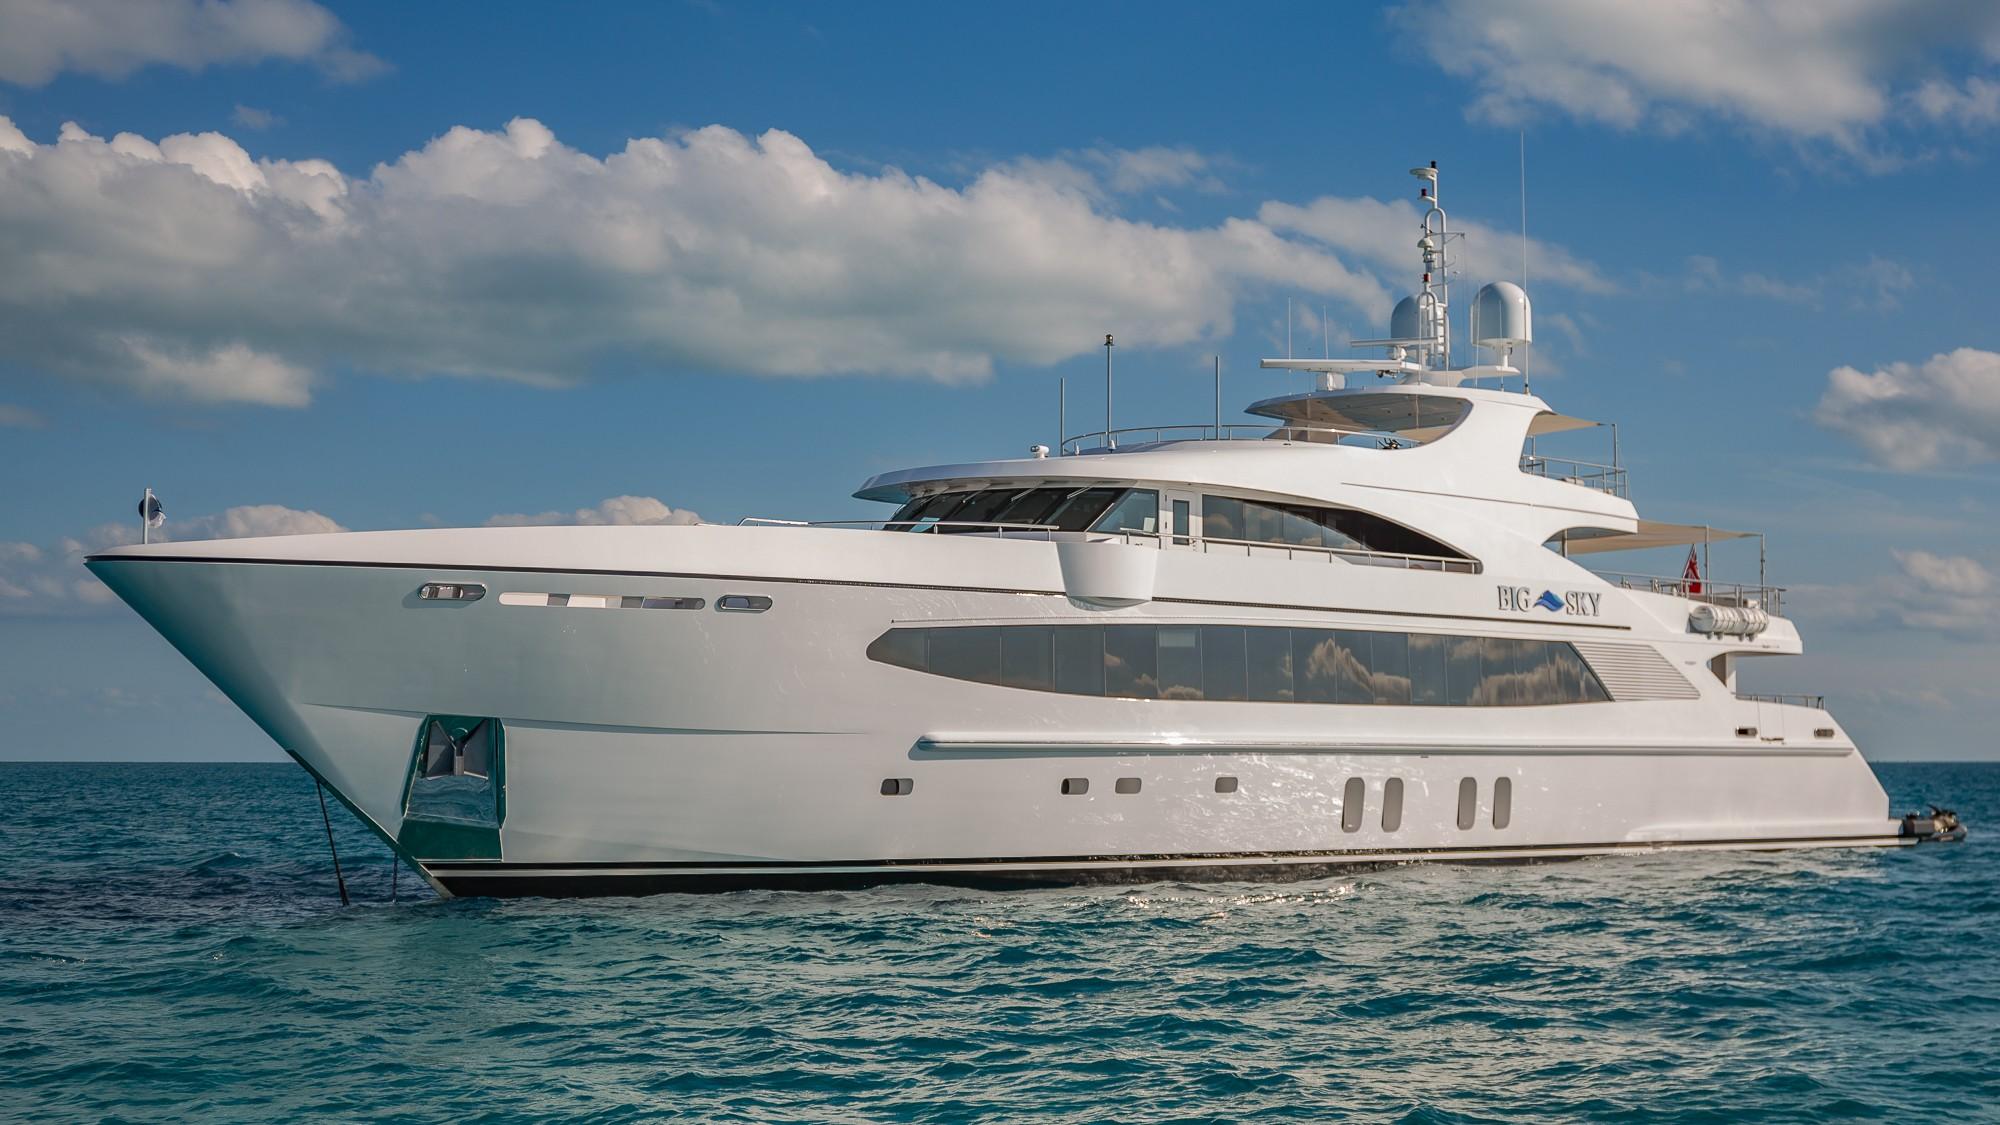 yachts for sale in nassau bahamas